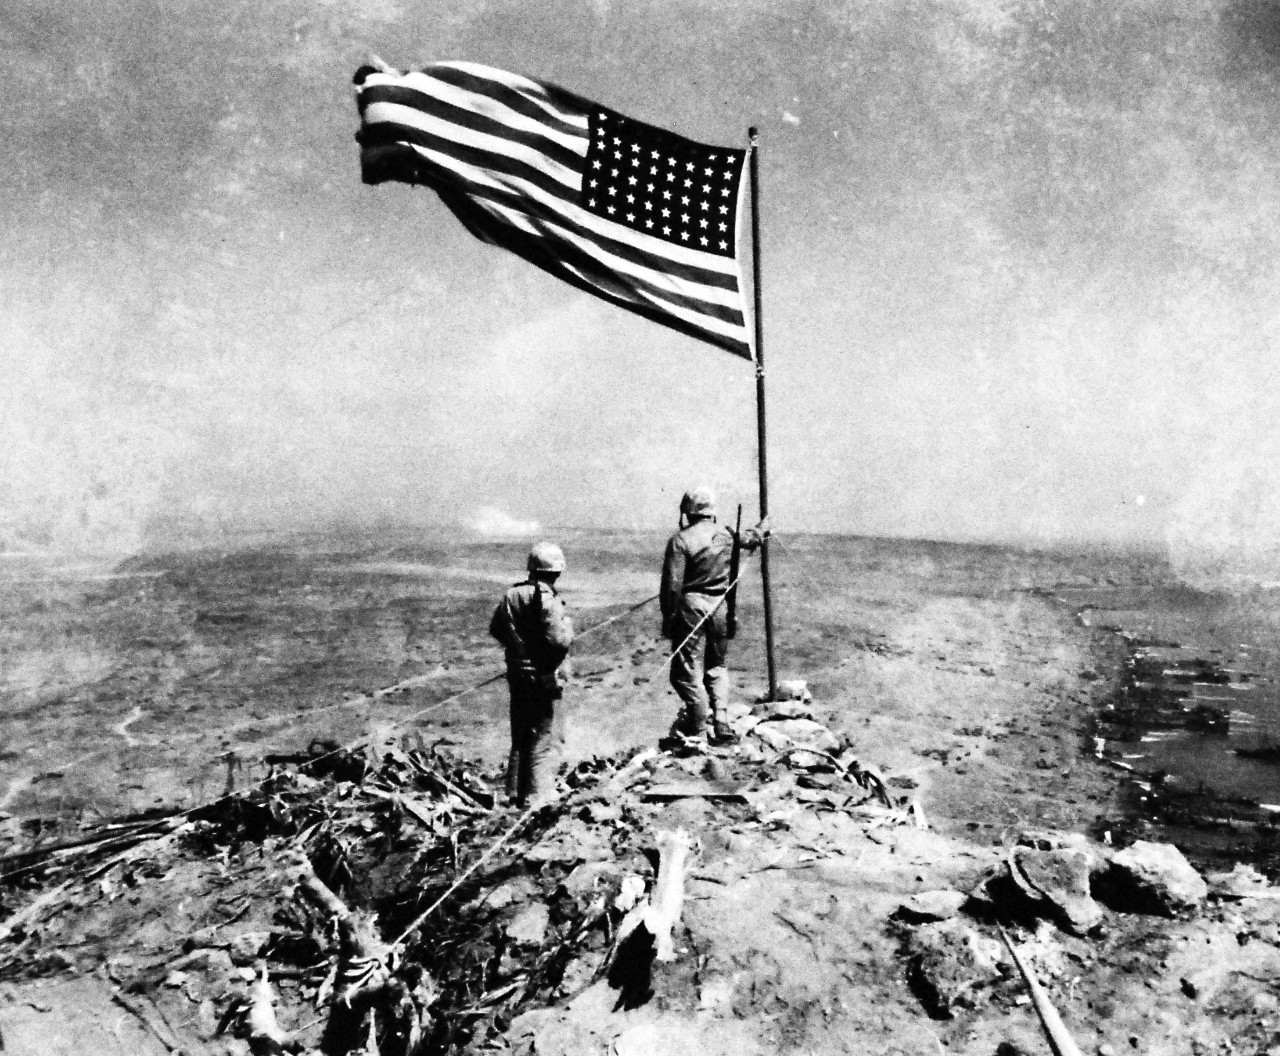 127-GW-319-142859: Iwo Jima Operations,  February 1945.   View to Northwest from Mount Suribachi, photographed by Kauffman, 1945.  Official U.S. Marine Corps Photograph, now in the collections of the National Archives.  (2016/09/06).